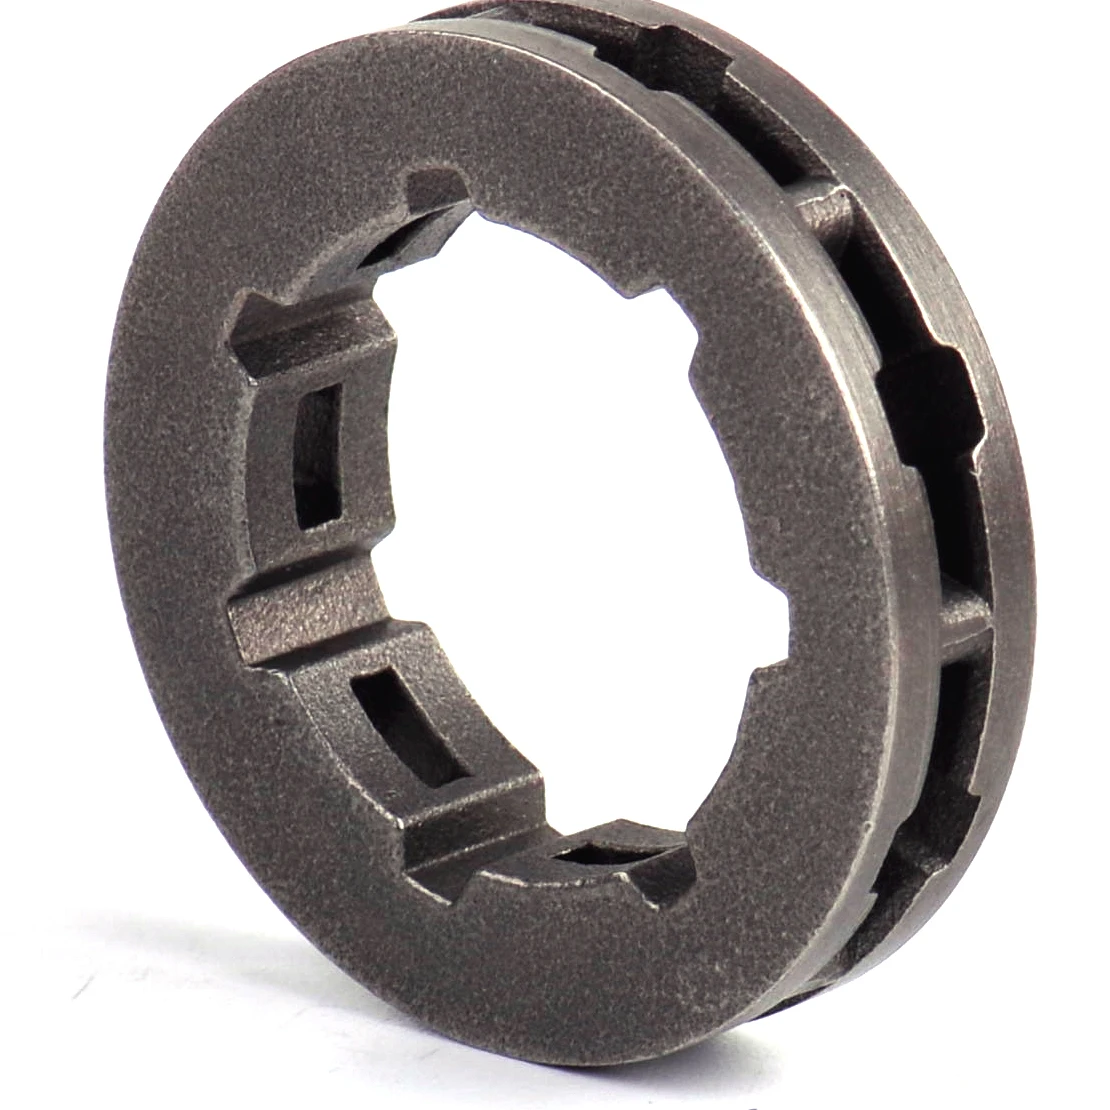 Chain Sprocket Clutch Drum Cage Bearing Fit For Stihl 044 046 MS460 Chainsaw 